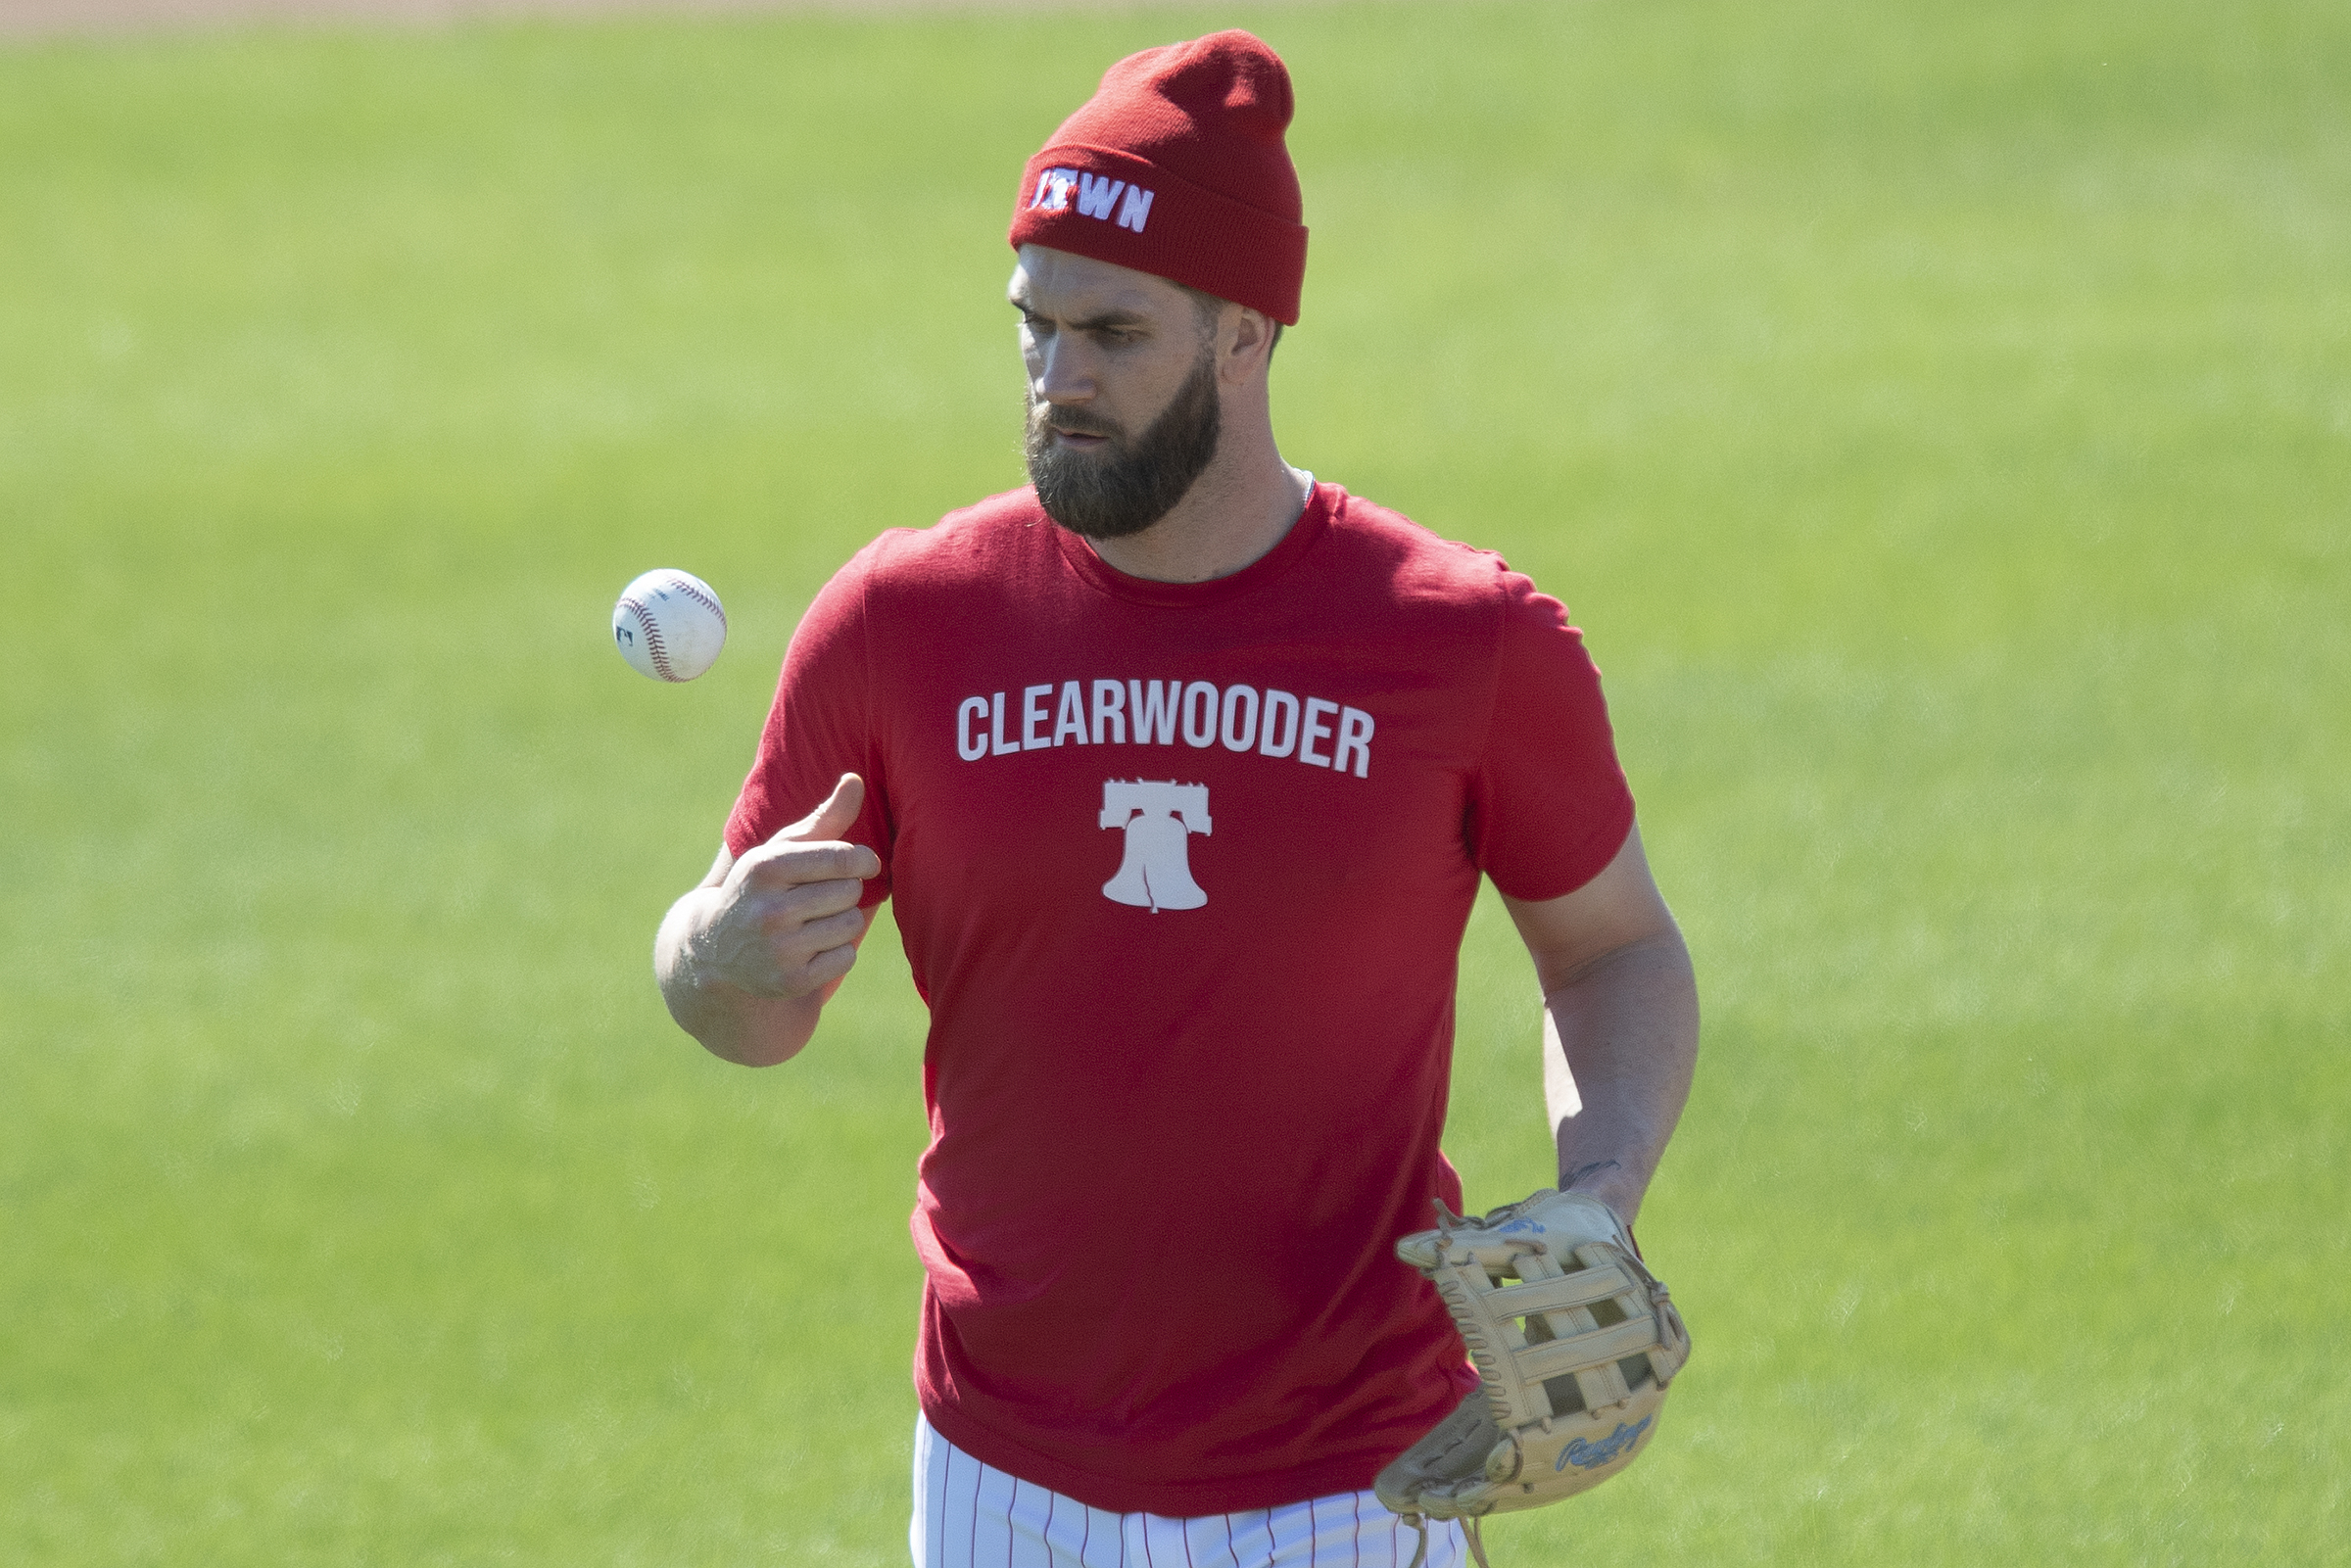 Bryce Harper arrives in Phillies camp with healthy back, Phanatic bat